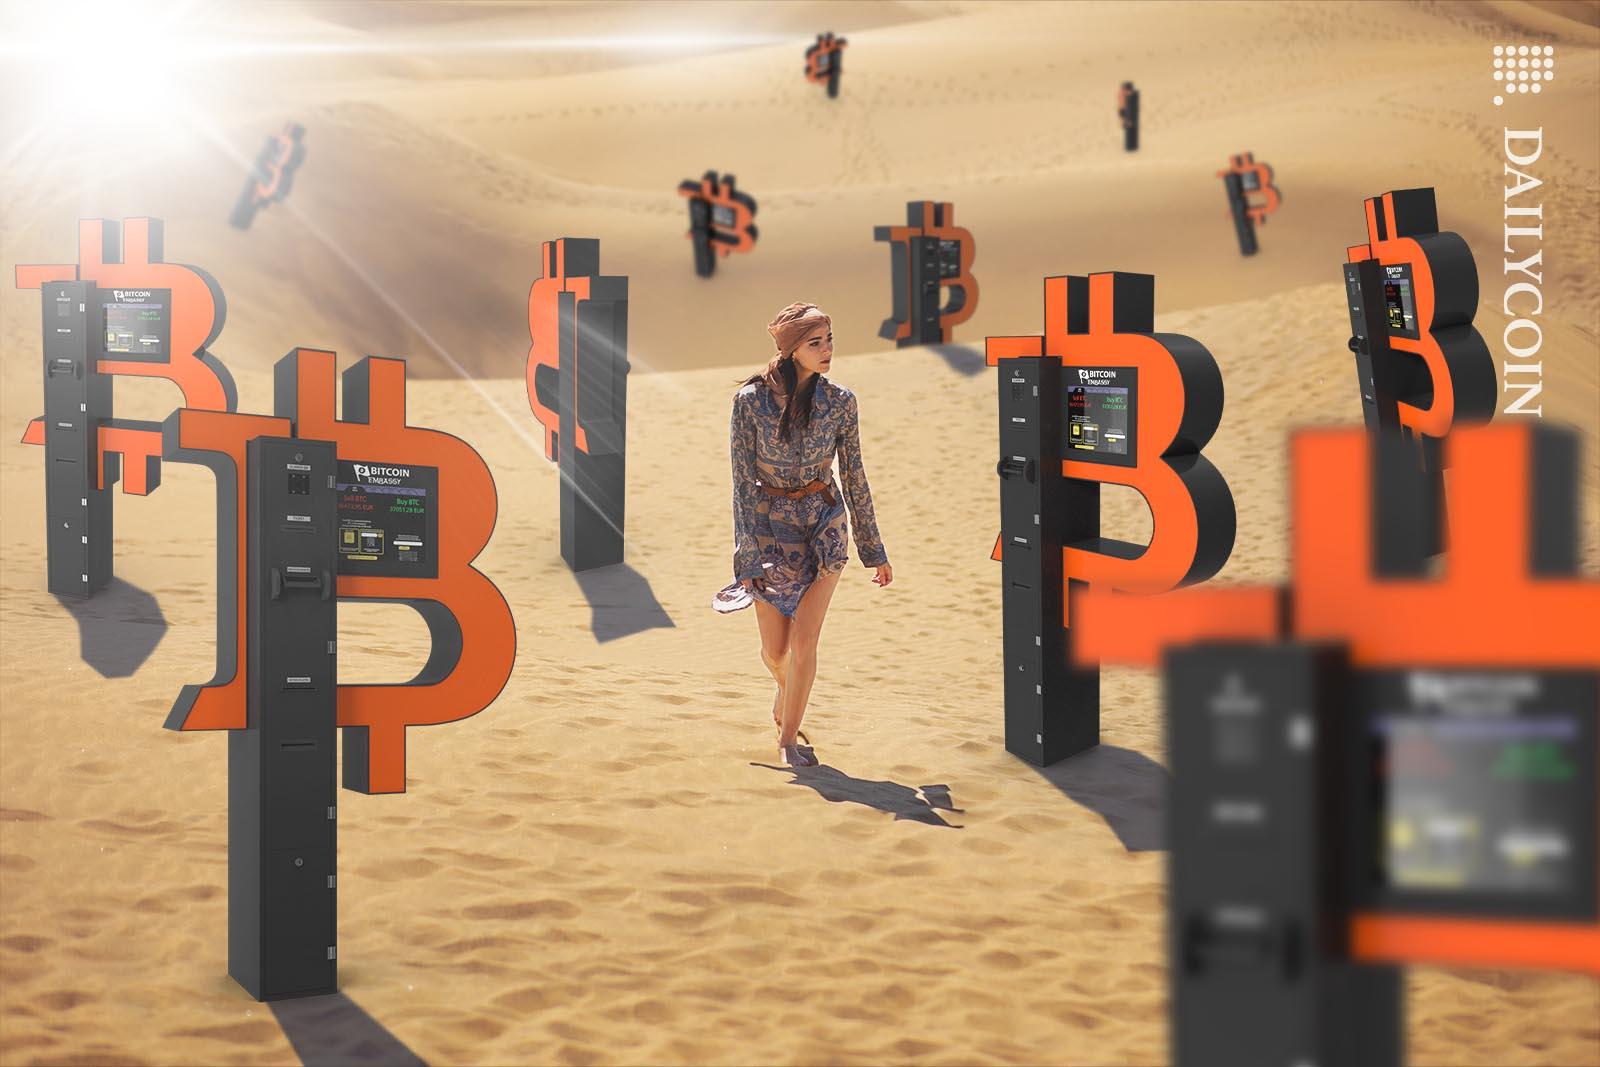 Woman walking in a desert surronded by Bitcoin ATMs.